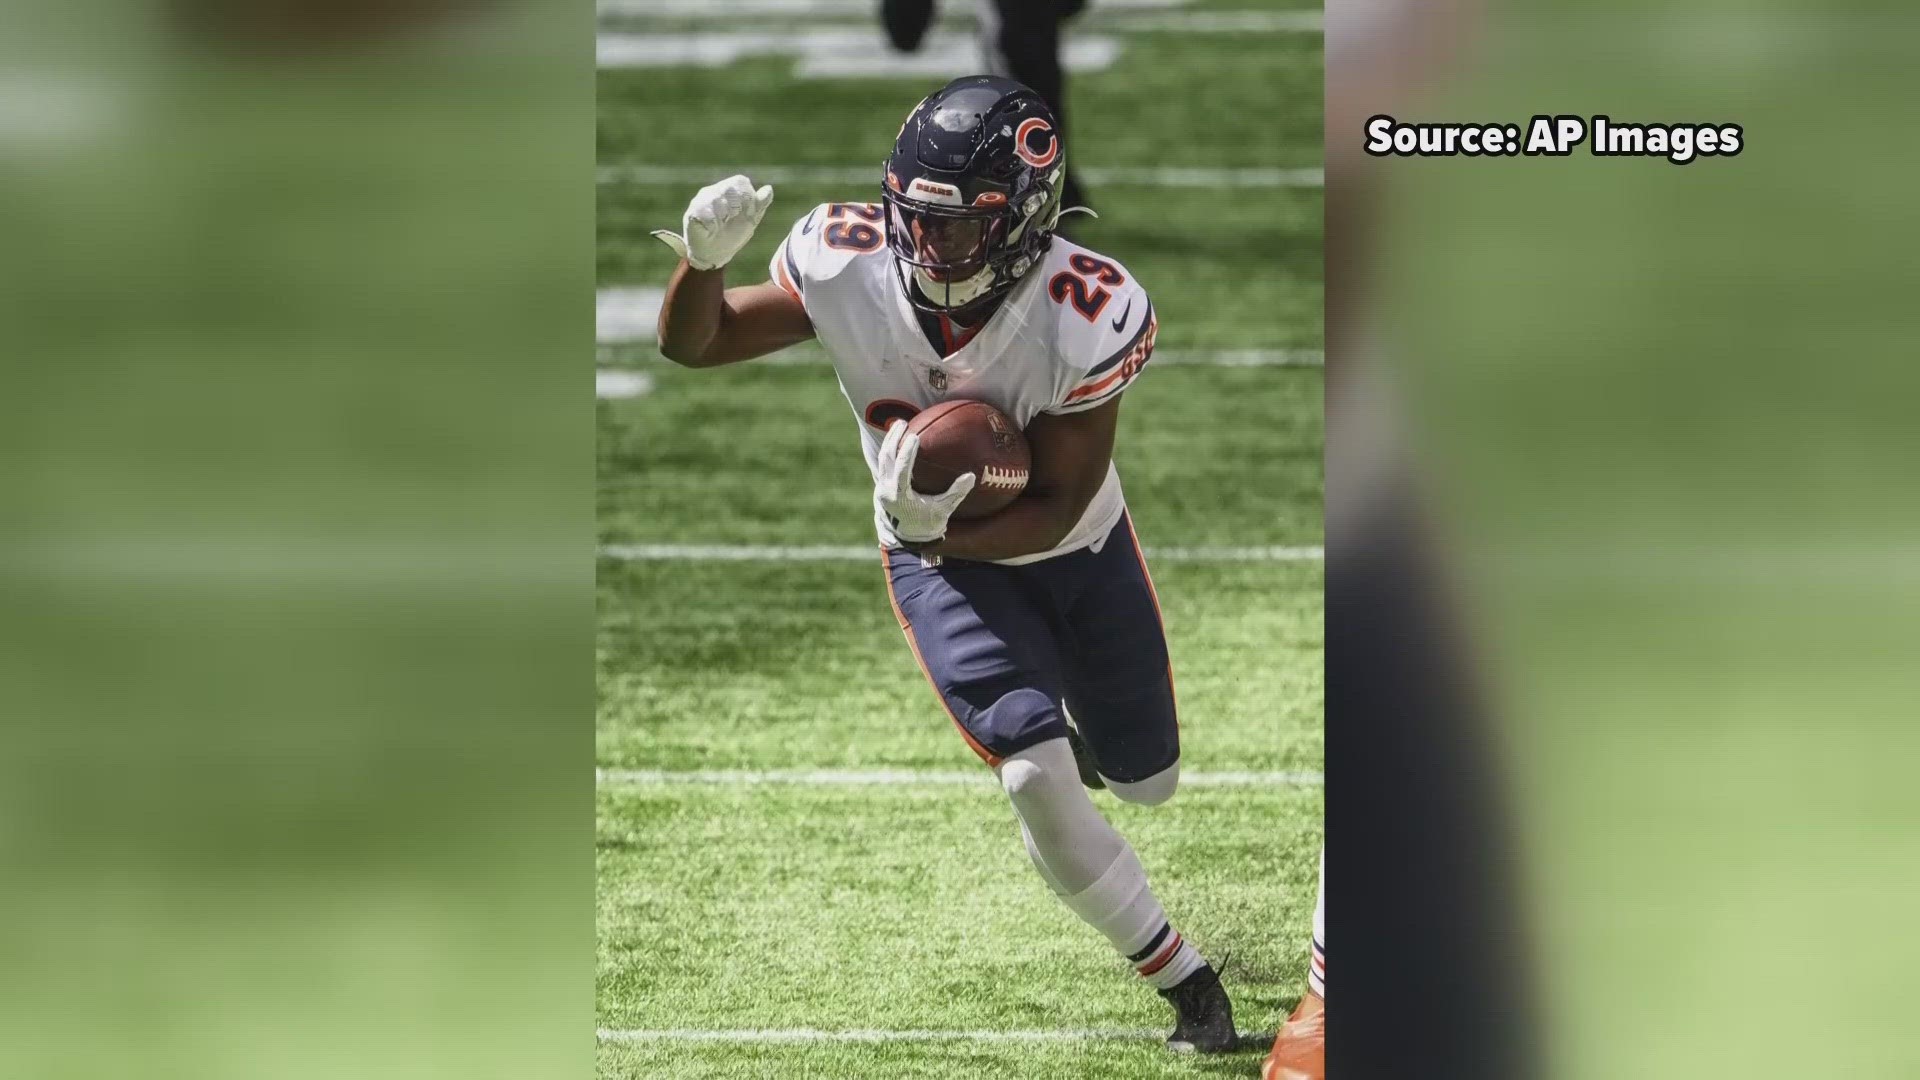 Tarik Cohen is getting a second chance in the NFL after multiple injuries interrupted his career.